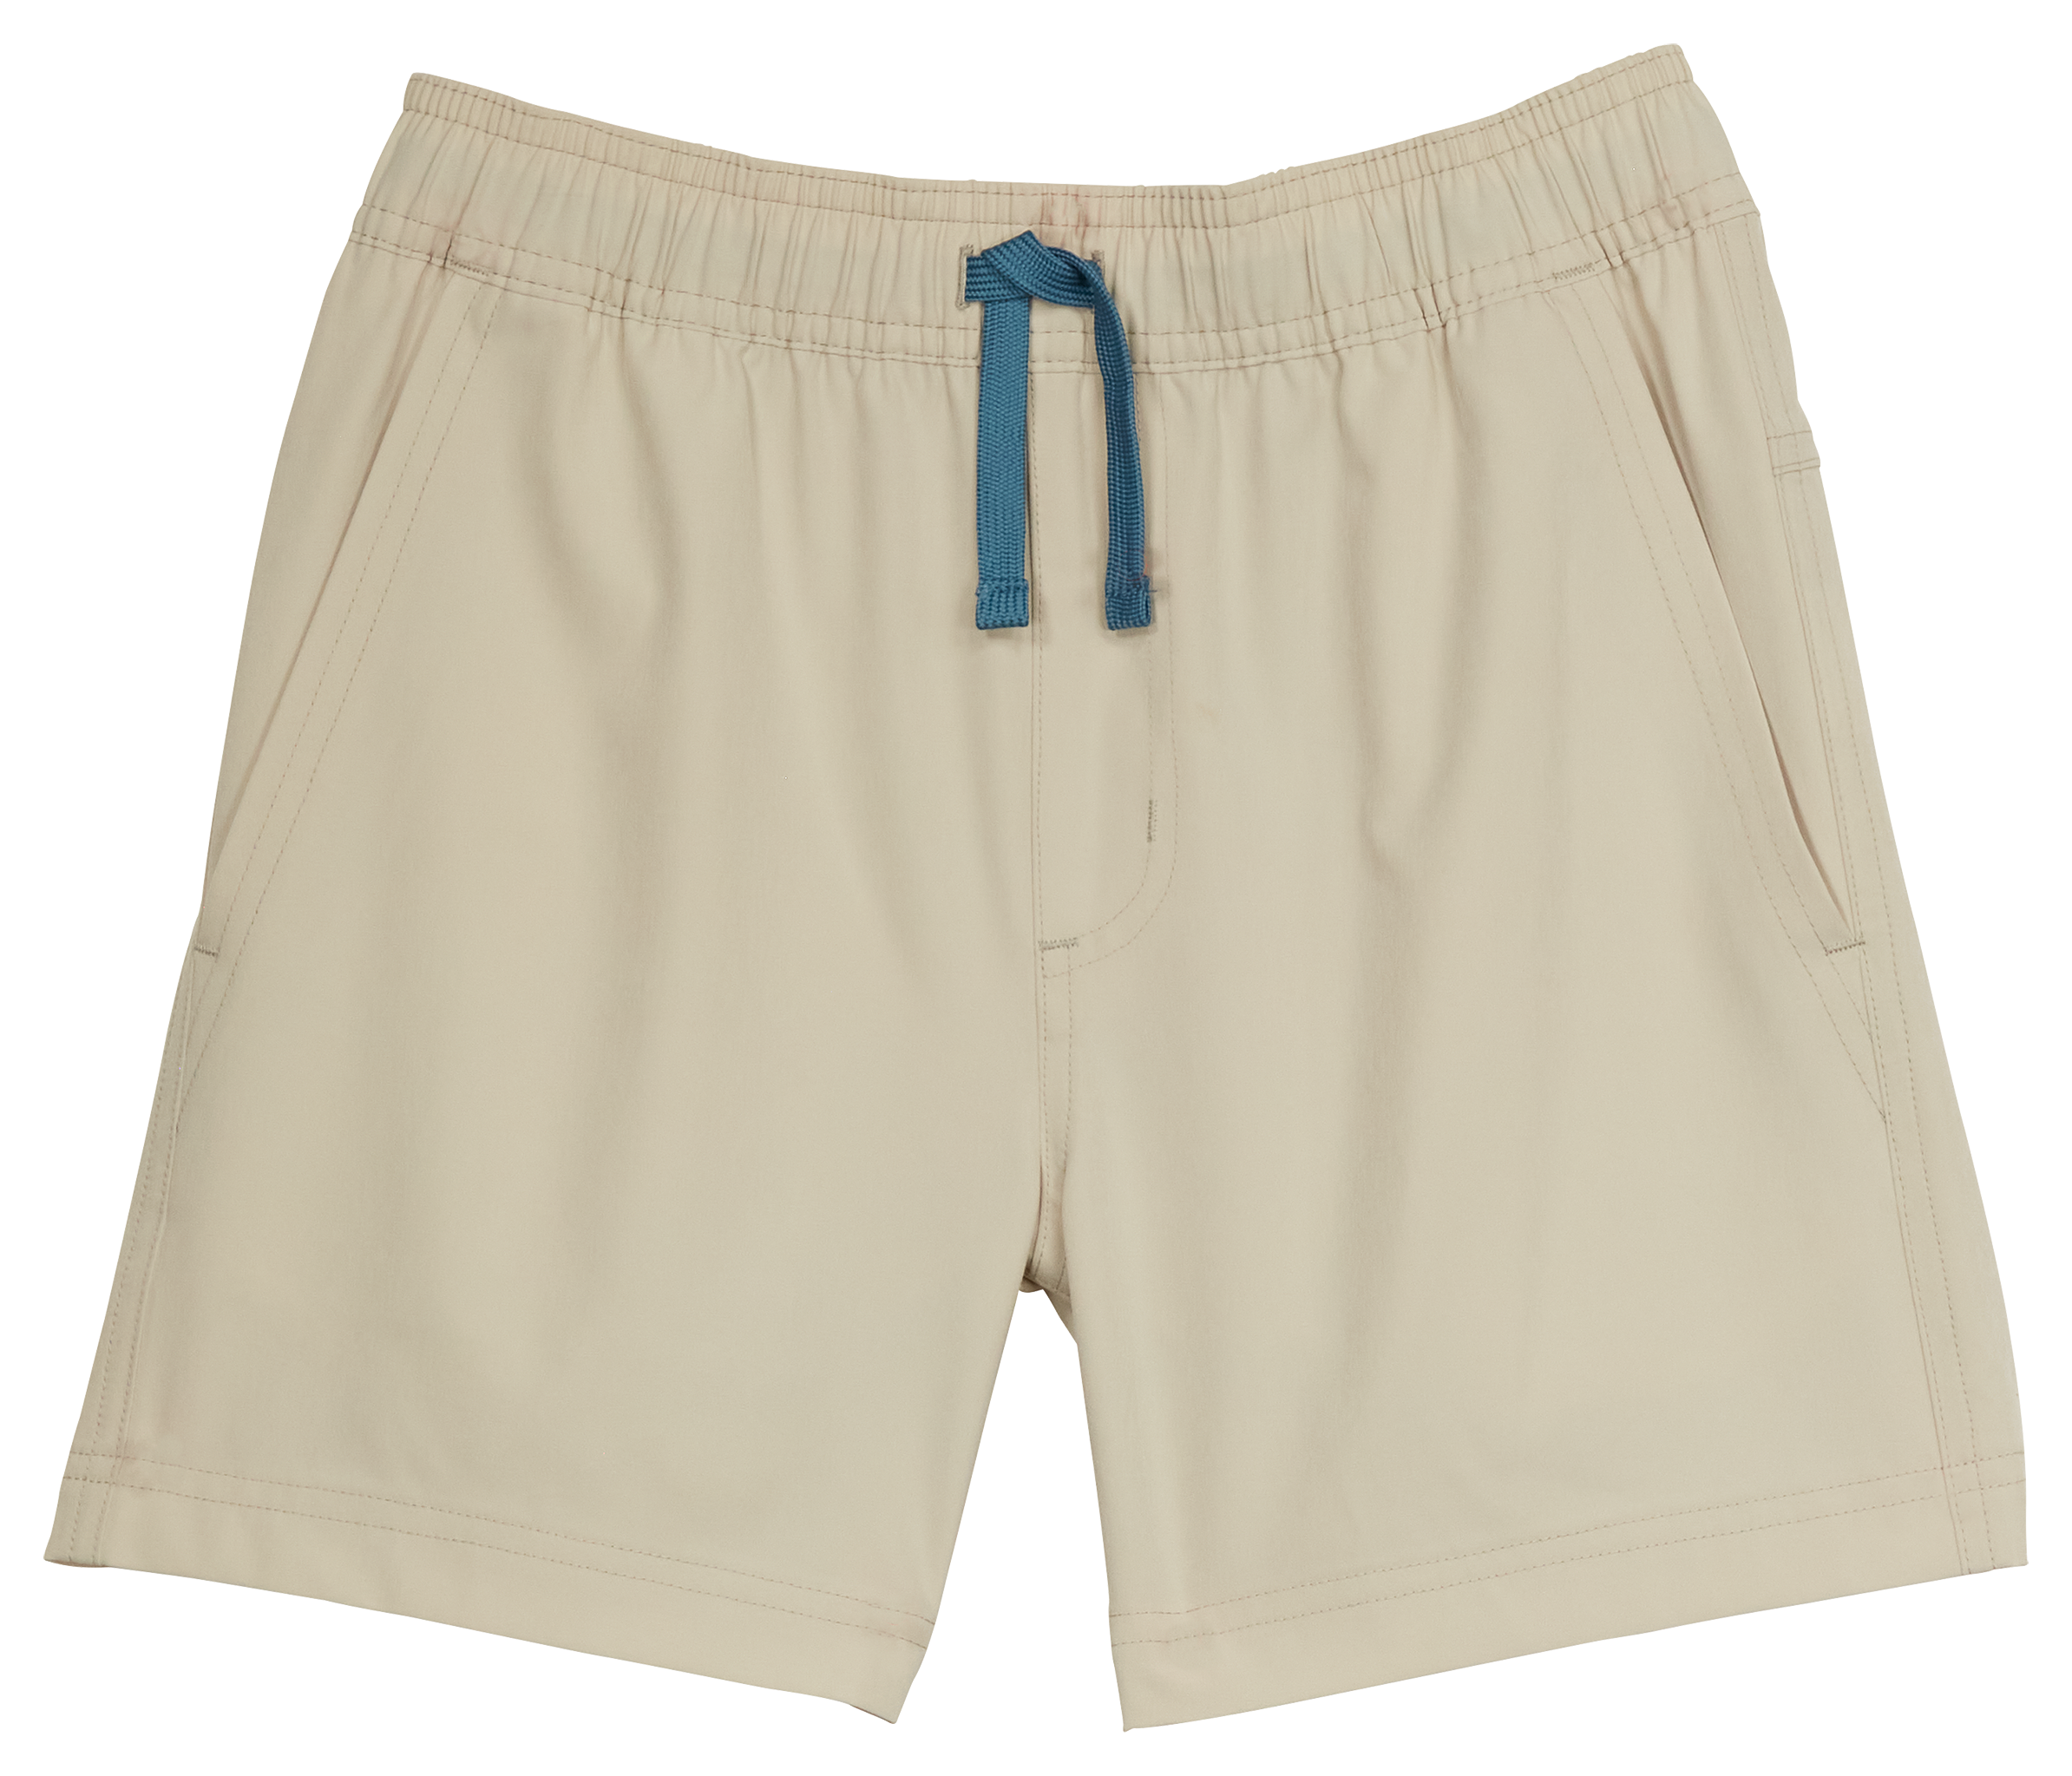 World Wide Sportsman Charter 3-Pocket Pull-On Shorts for Kids - Peyote - S